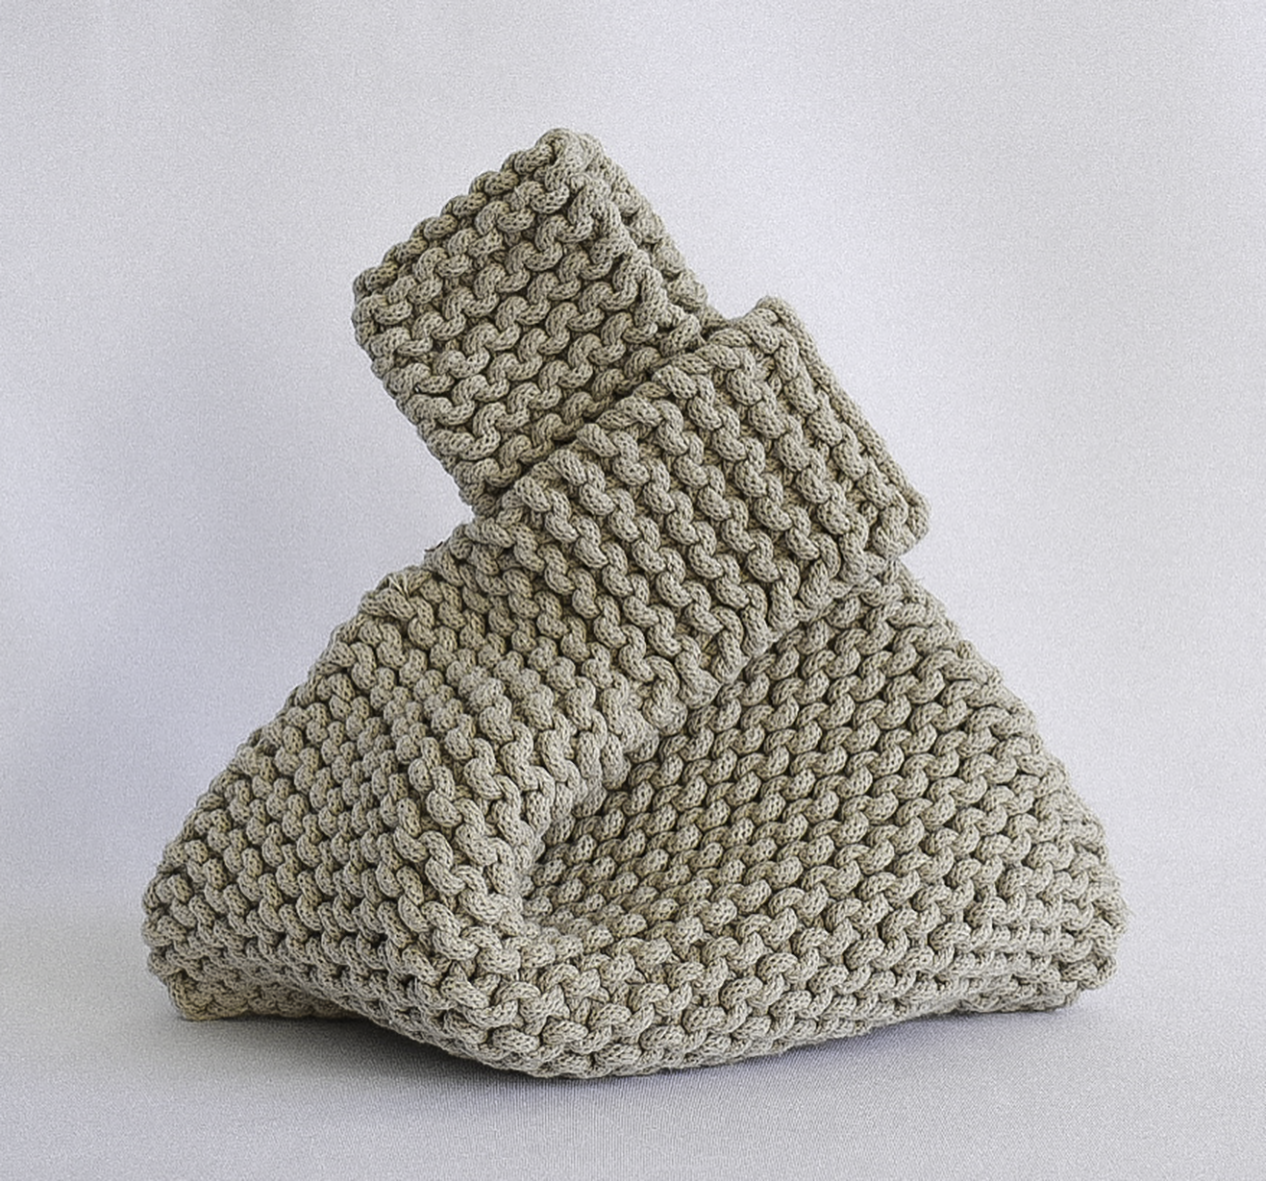 hand knitted knot bag, made with 100% recycled cotton textiles